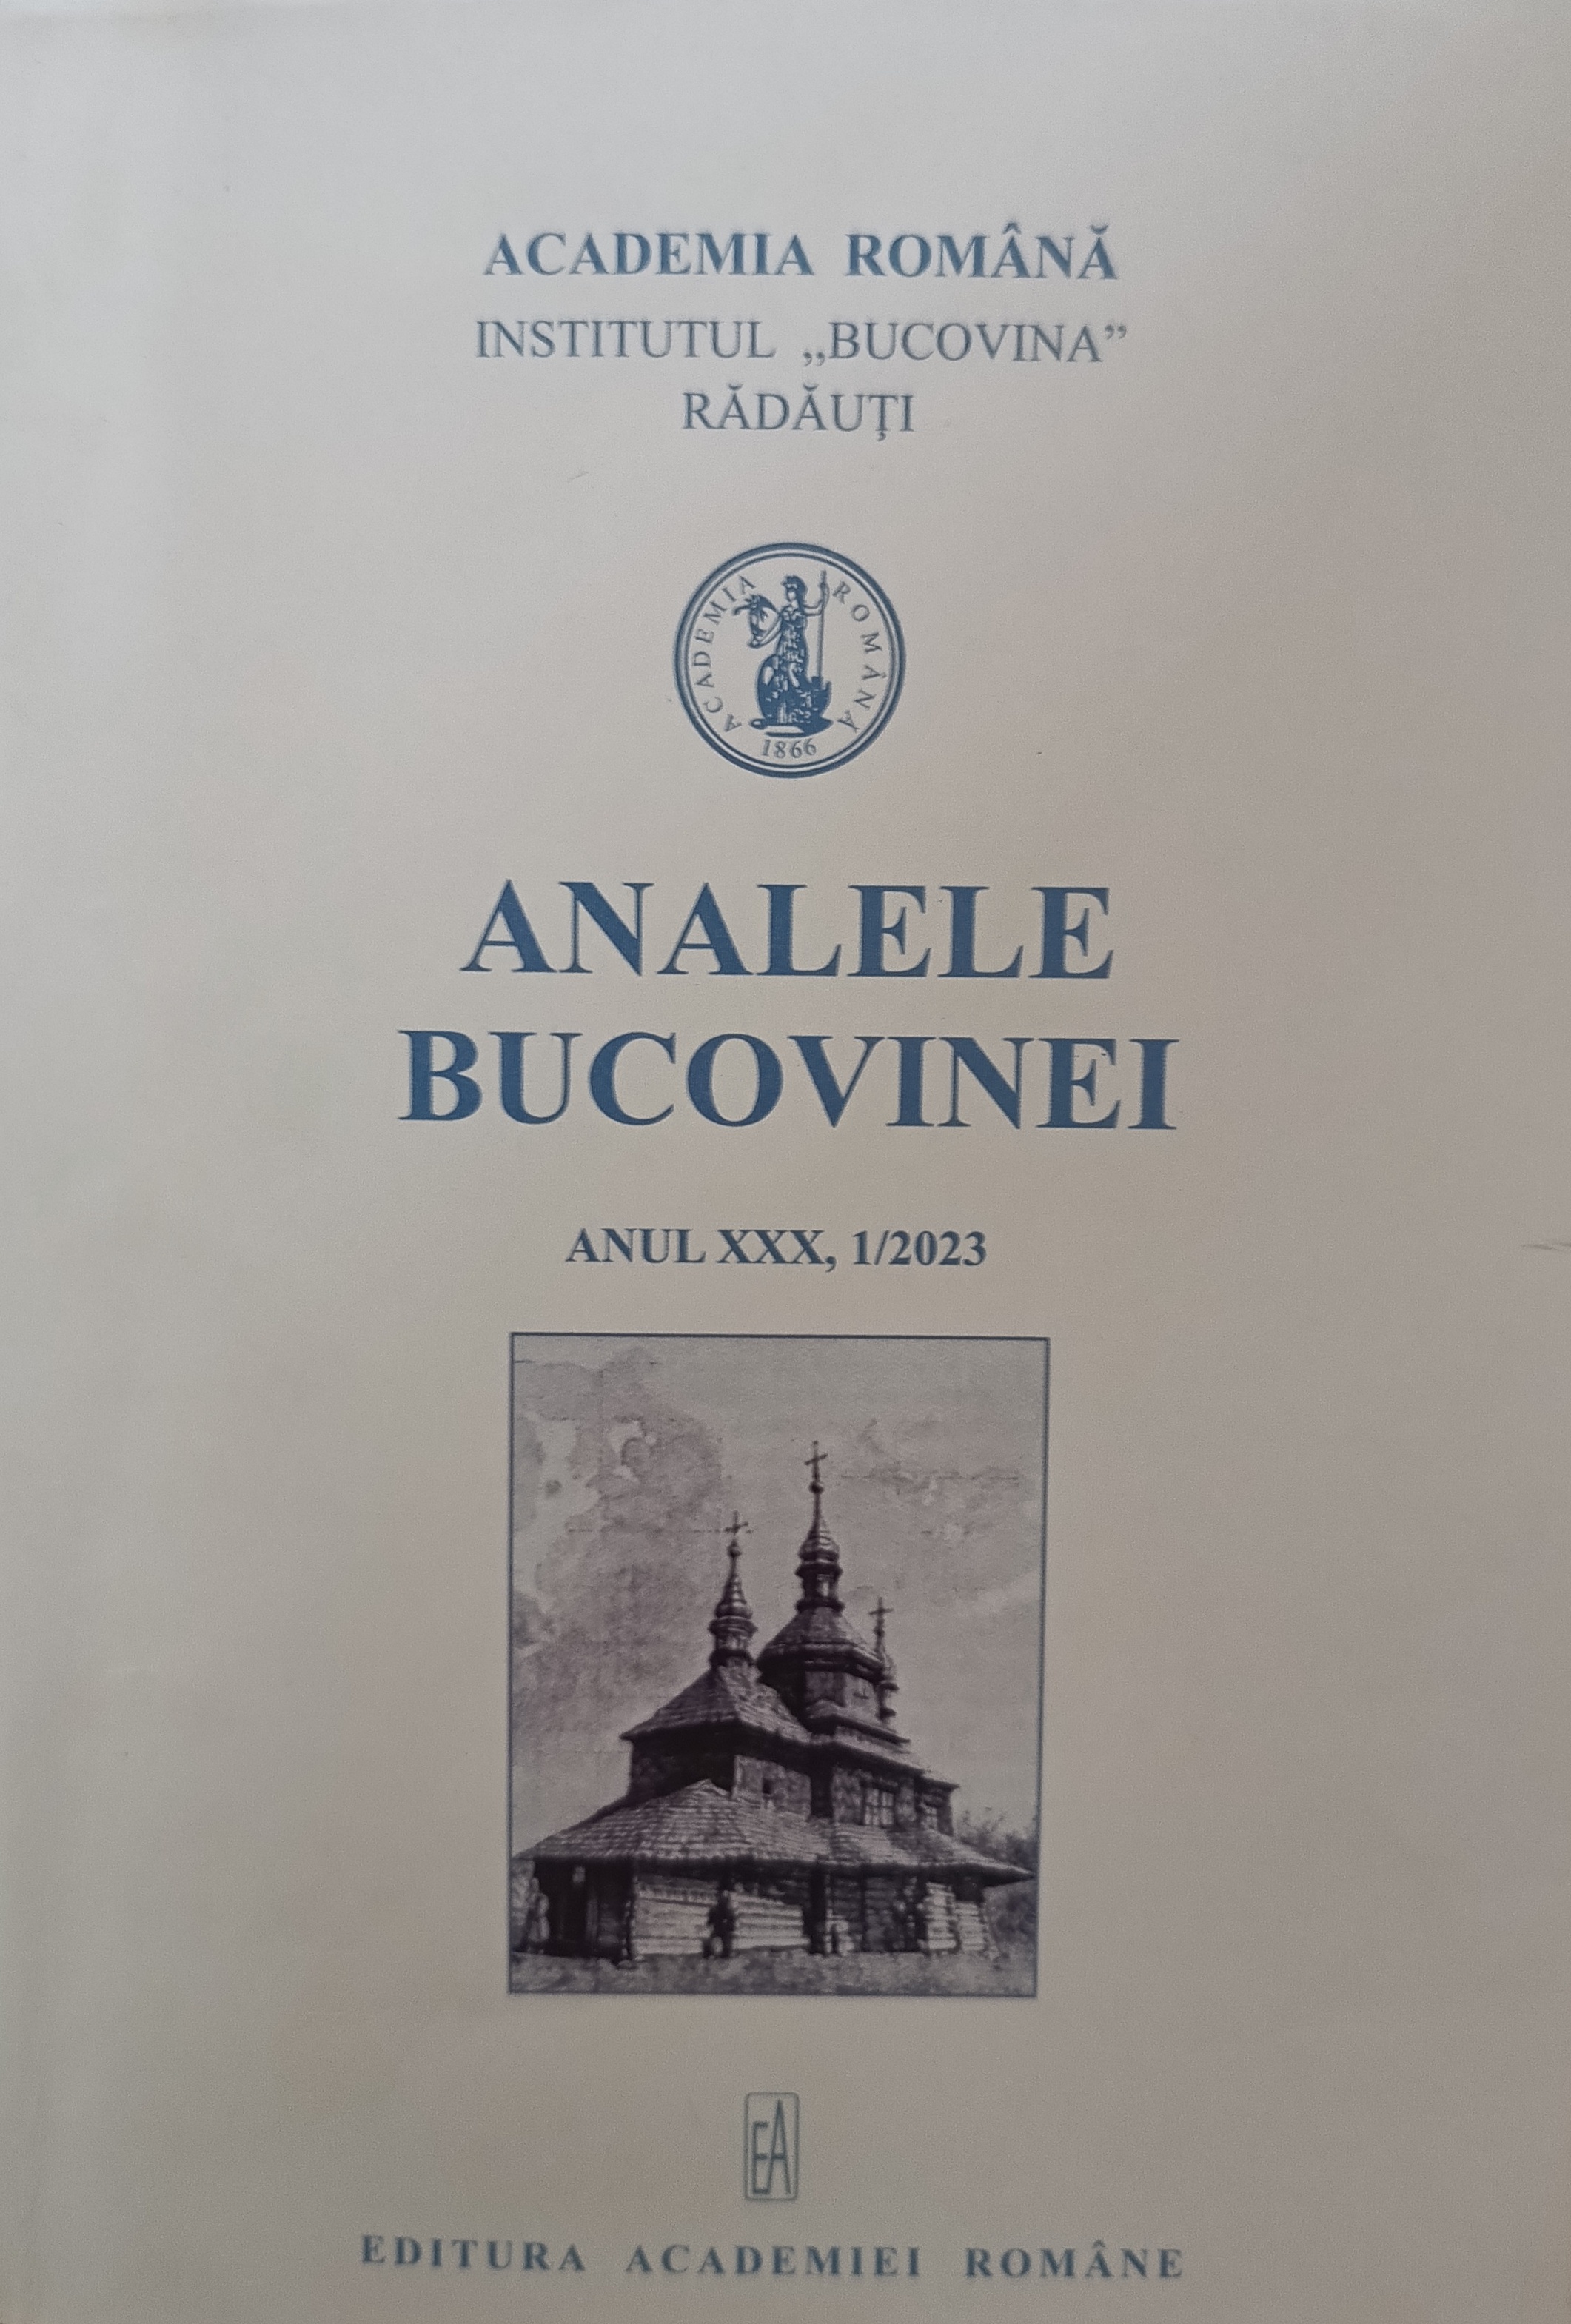 History of the Hospital in Rădăuți Cover Image